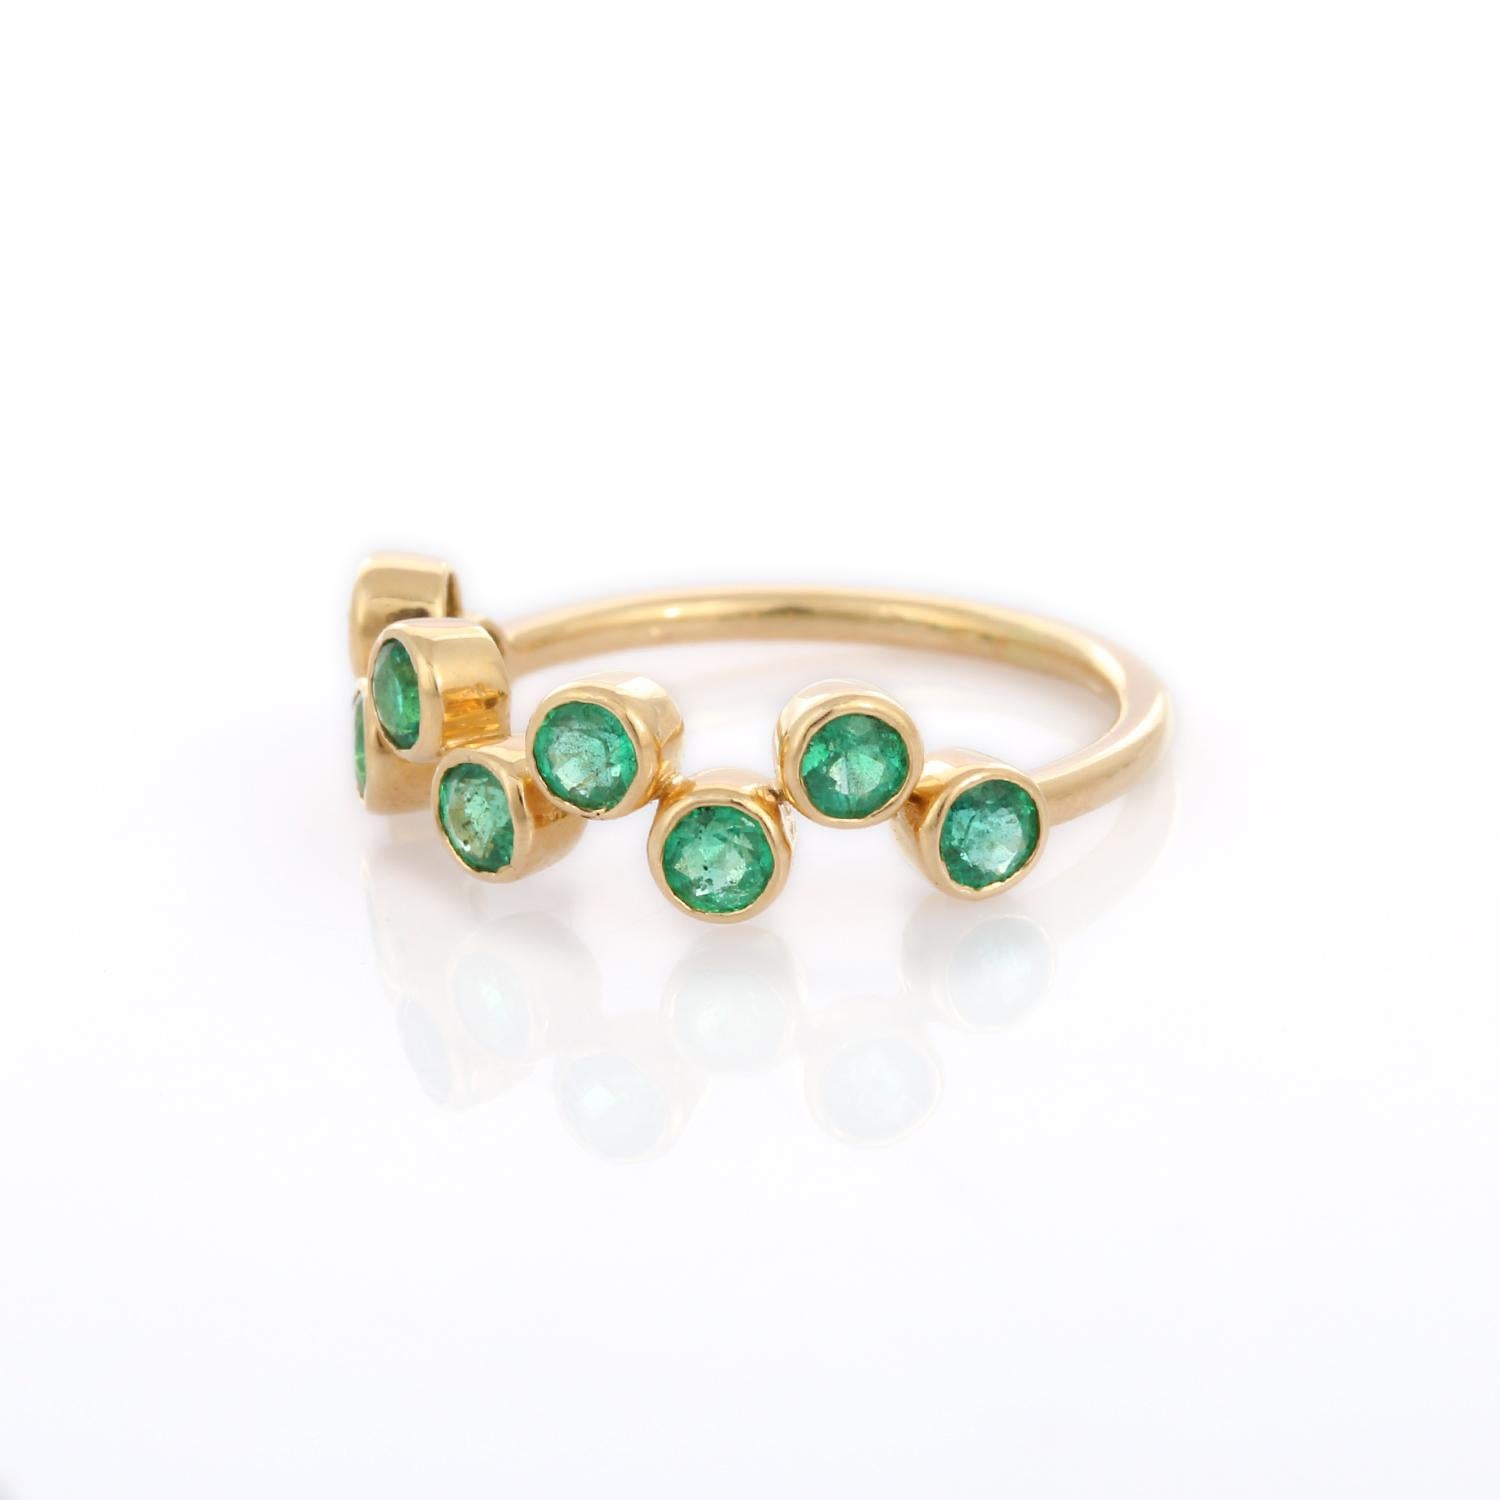 For Sale:  Emerald Gemstone Stacking Ring in 18K Yellow Gold 3